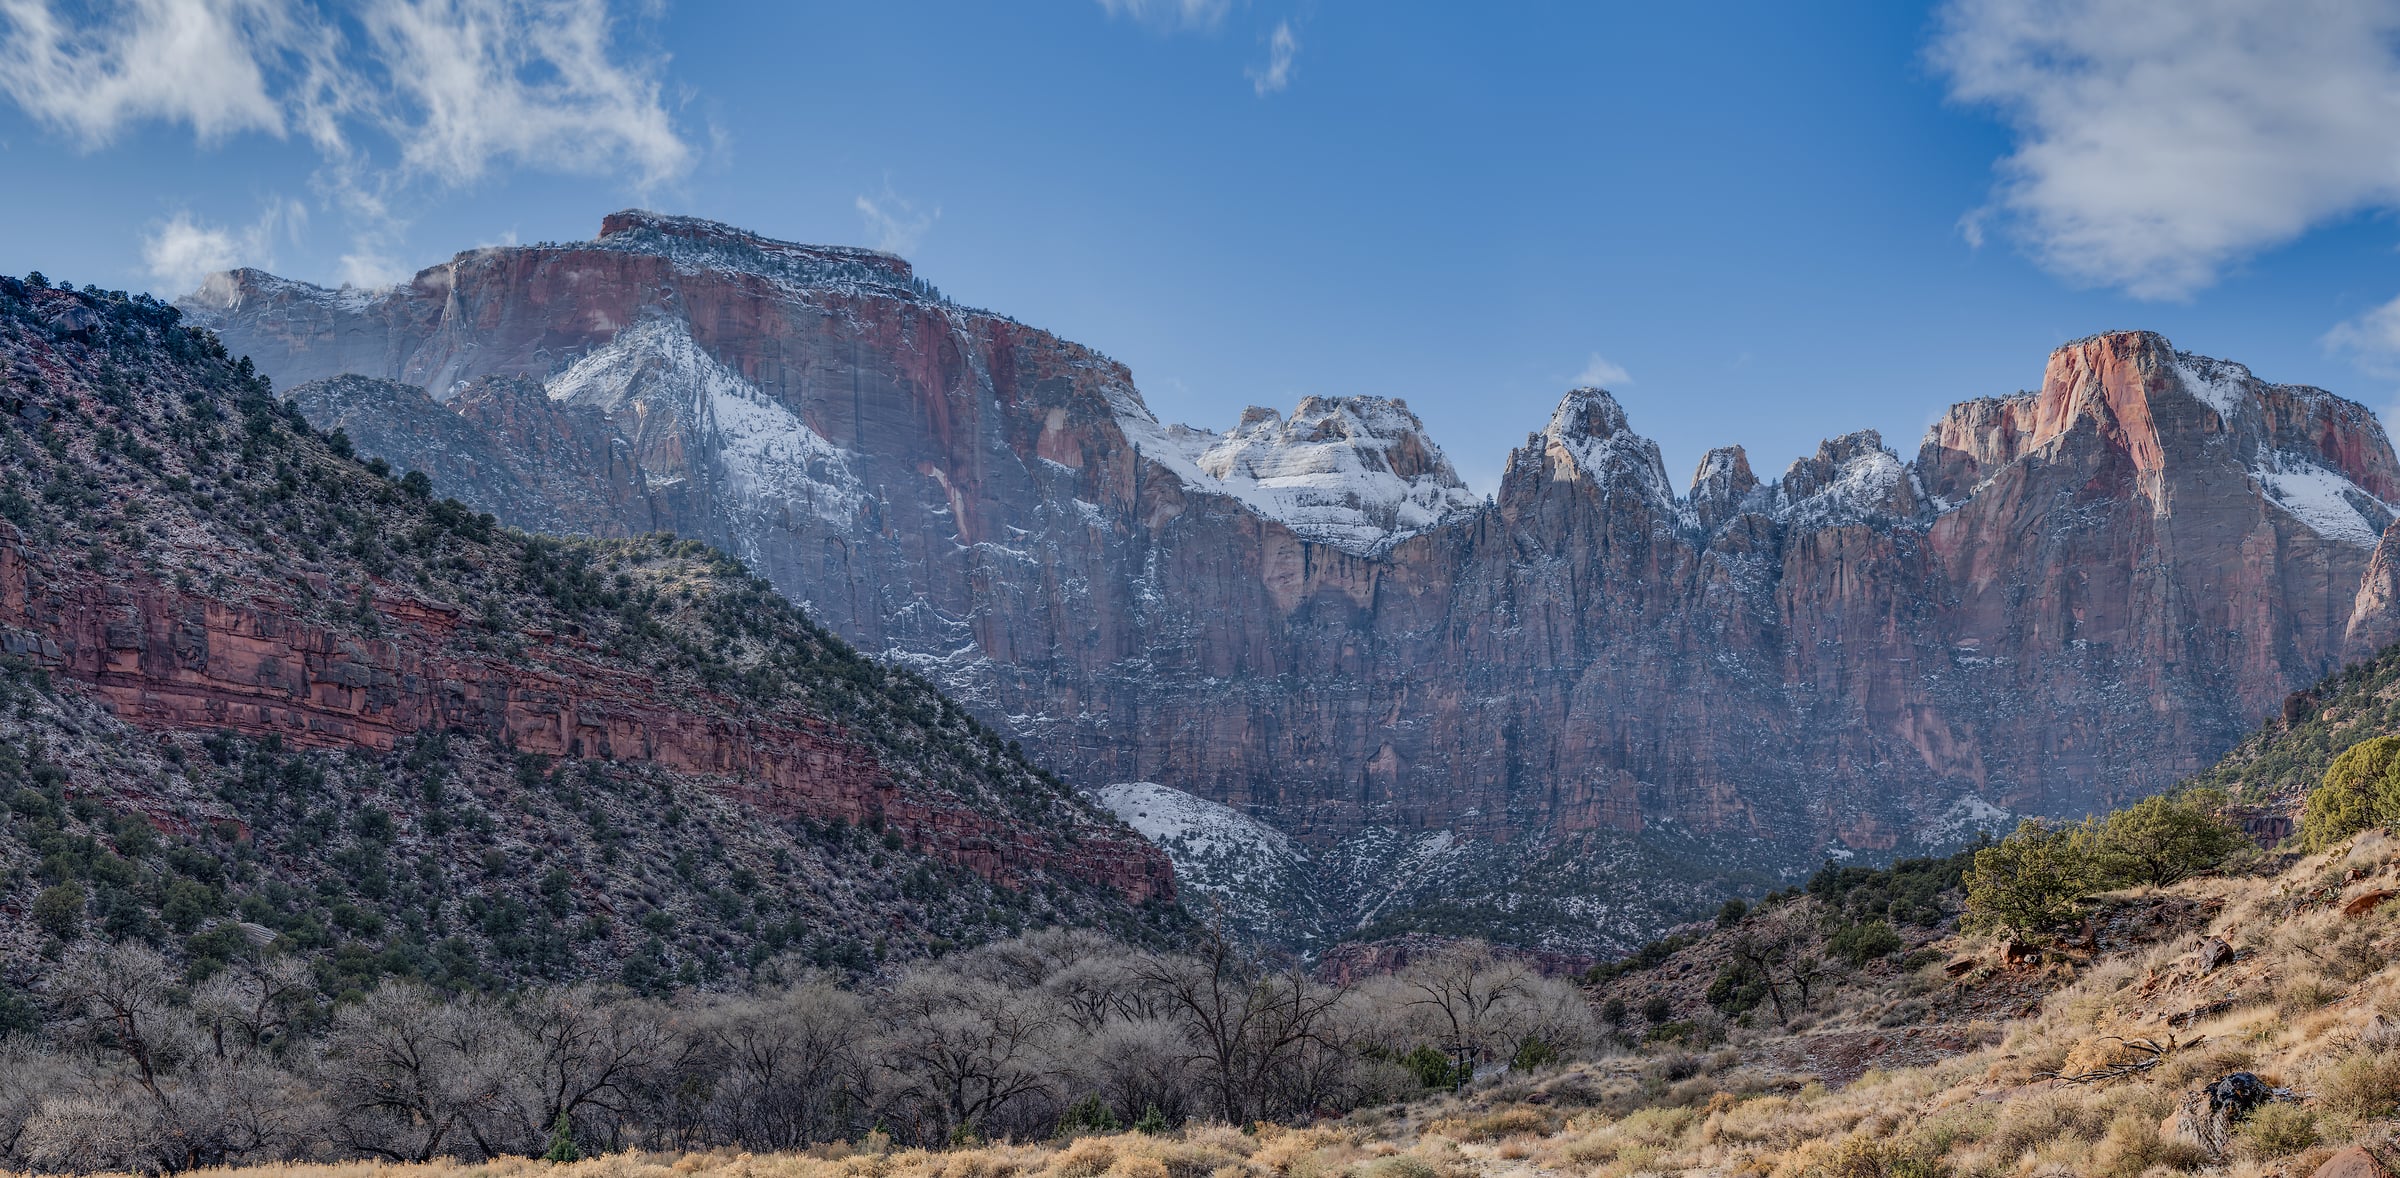 301 megapixels! A very high resolution, large-format VAST photo print of the Towers of the Virgin sandstone monoliths in Zion National Park; landscape photograph created by Chris Blake.